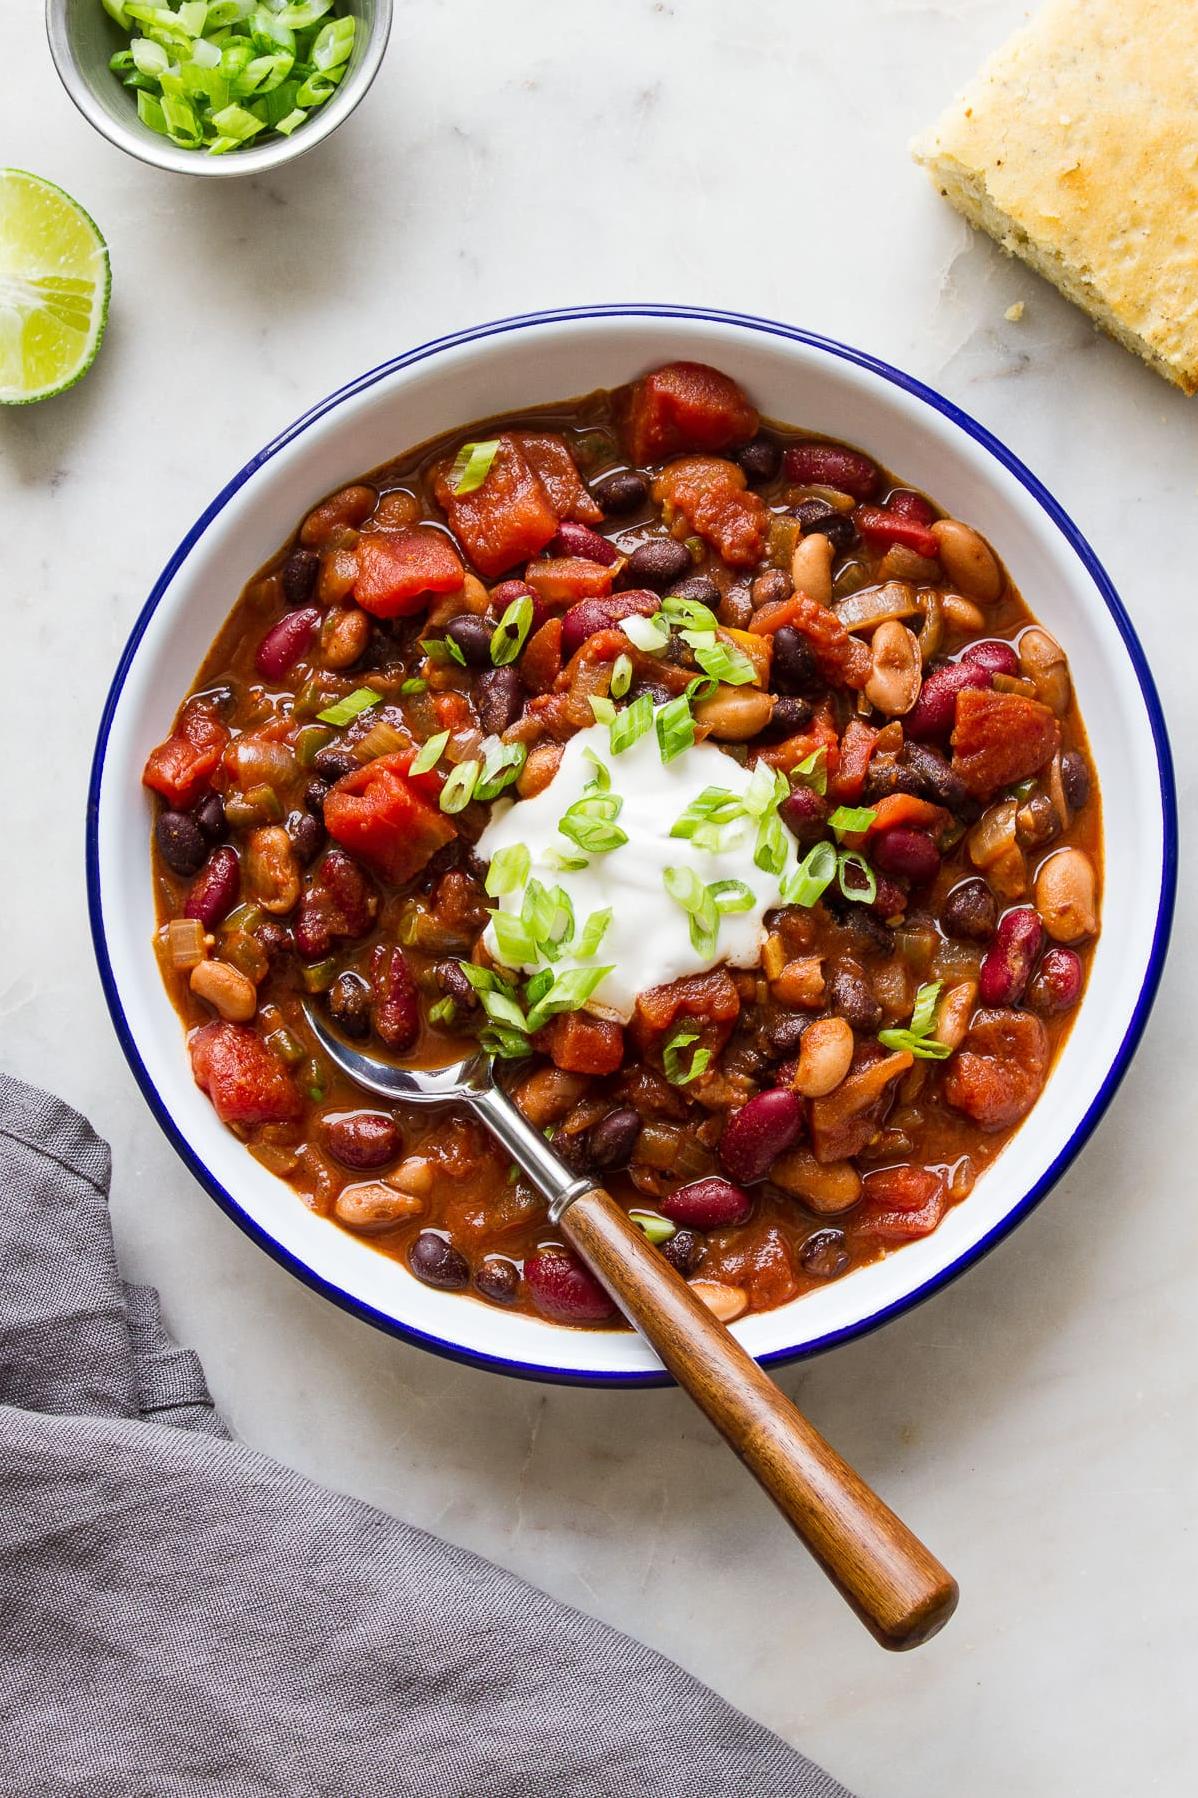  This hearty chili is perfect for chilly winter nights.